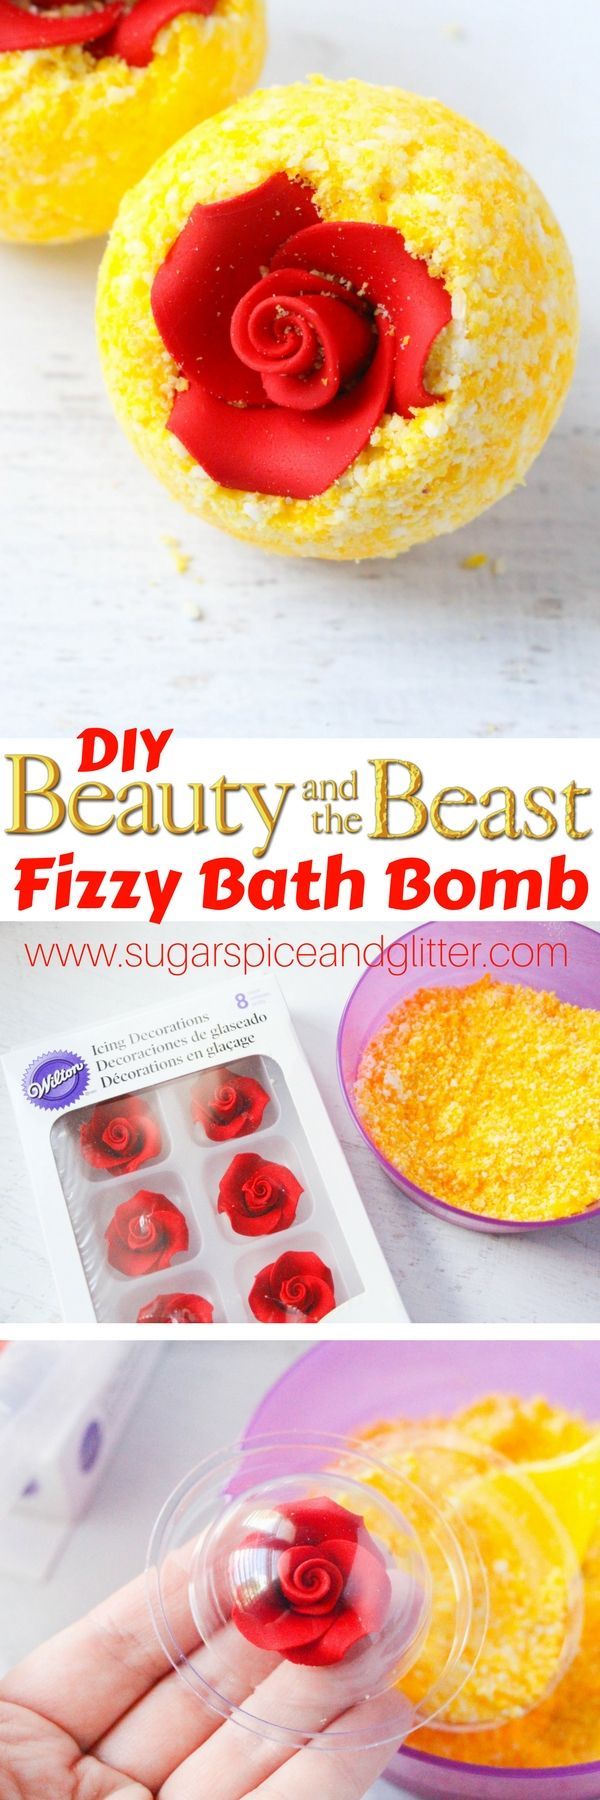 DIY Belle’s Bath Bombs – a fun Disney DIY gift or addition to your Disney movie night. The perfect Beauty & the Beast craft for